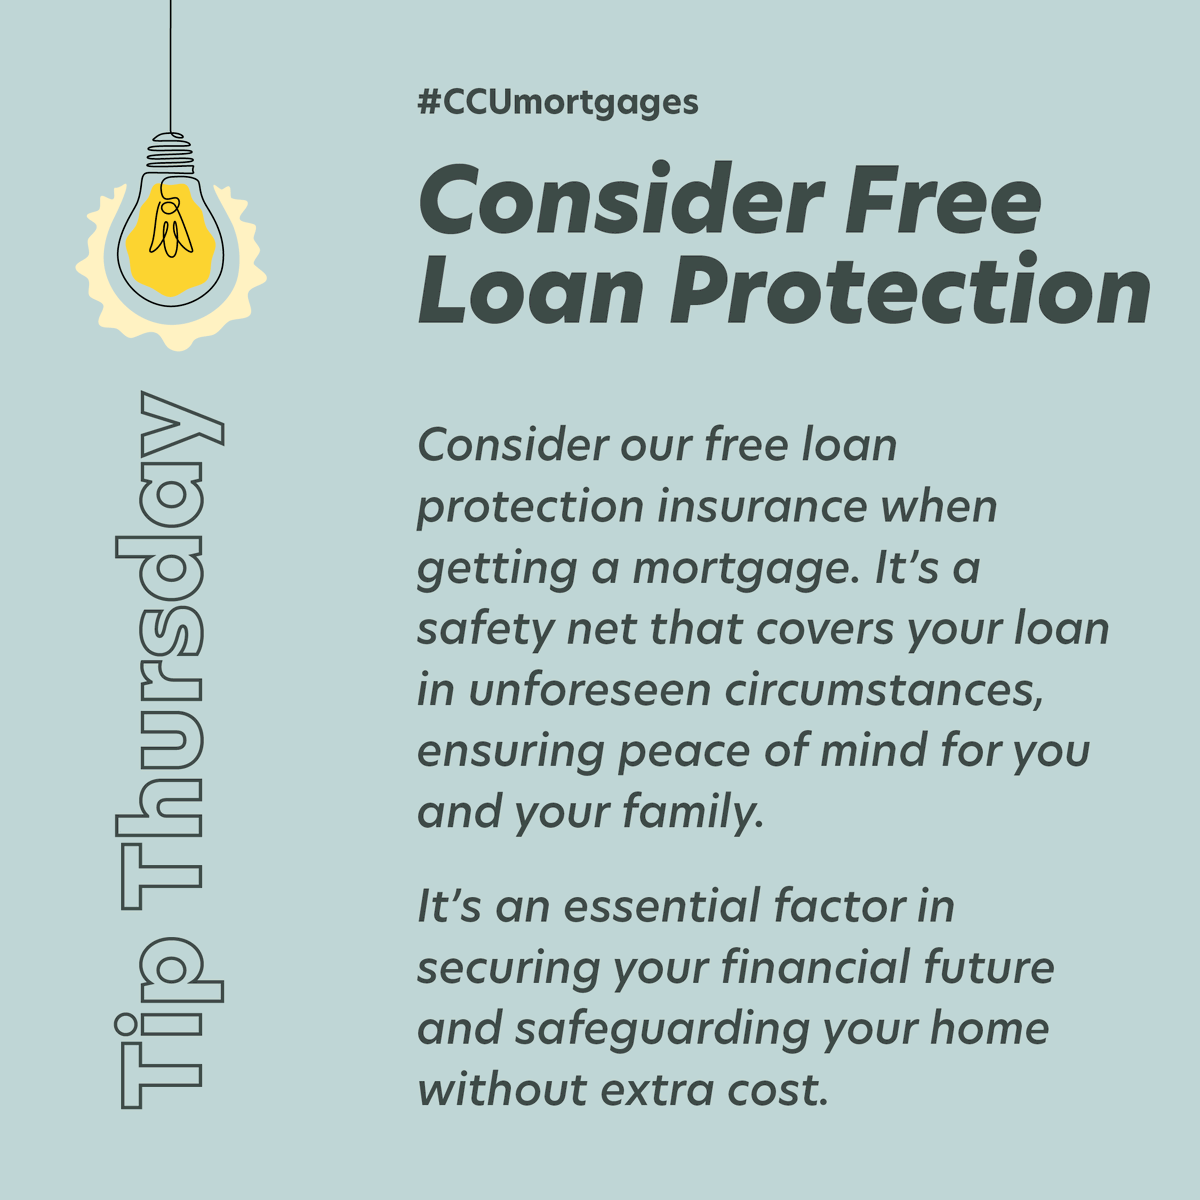 Free loan protection insurance? Yes! And that includes Mortgage!!

It’s your safety net for unforeseen circumstances, ensuring your family’s financial future and home are safeguarded. 

#AskAudrey #MortgageTips #CCUmortgages #FinanceTips  #mortgagehelp